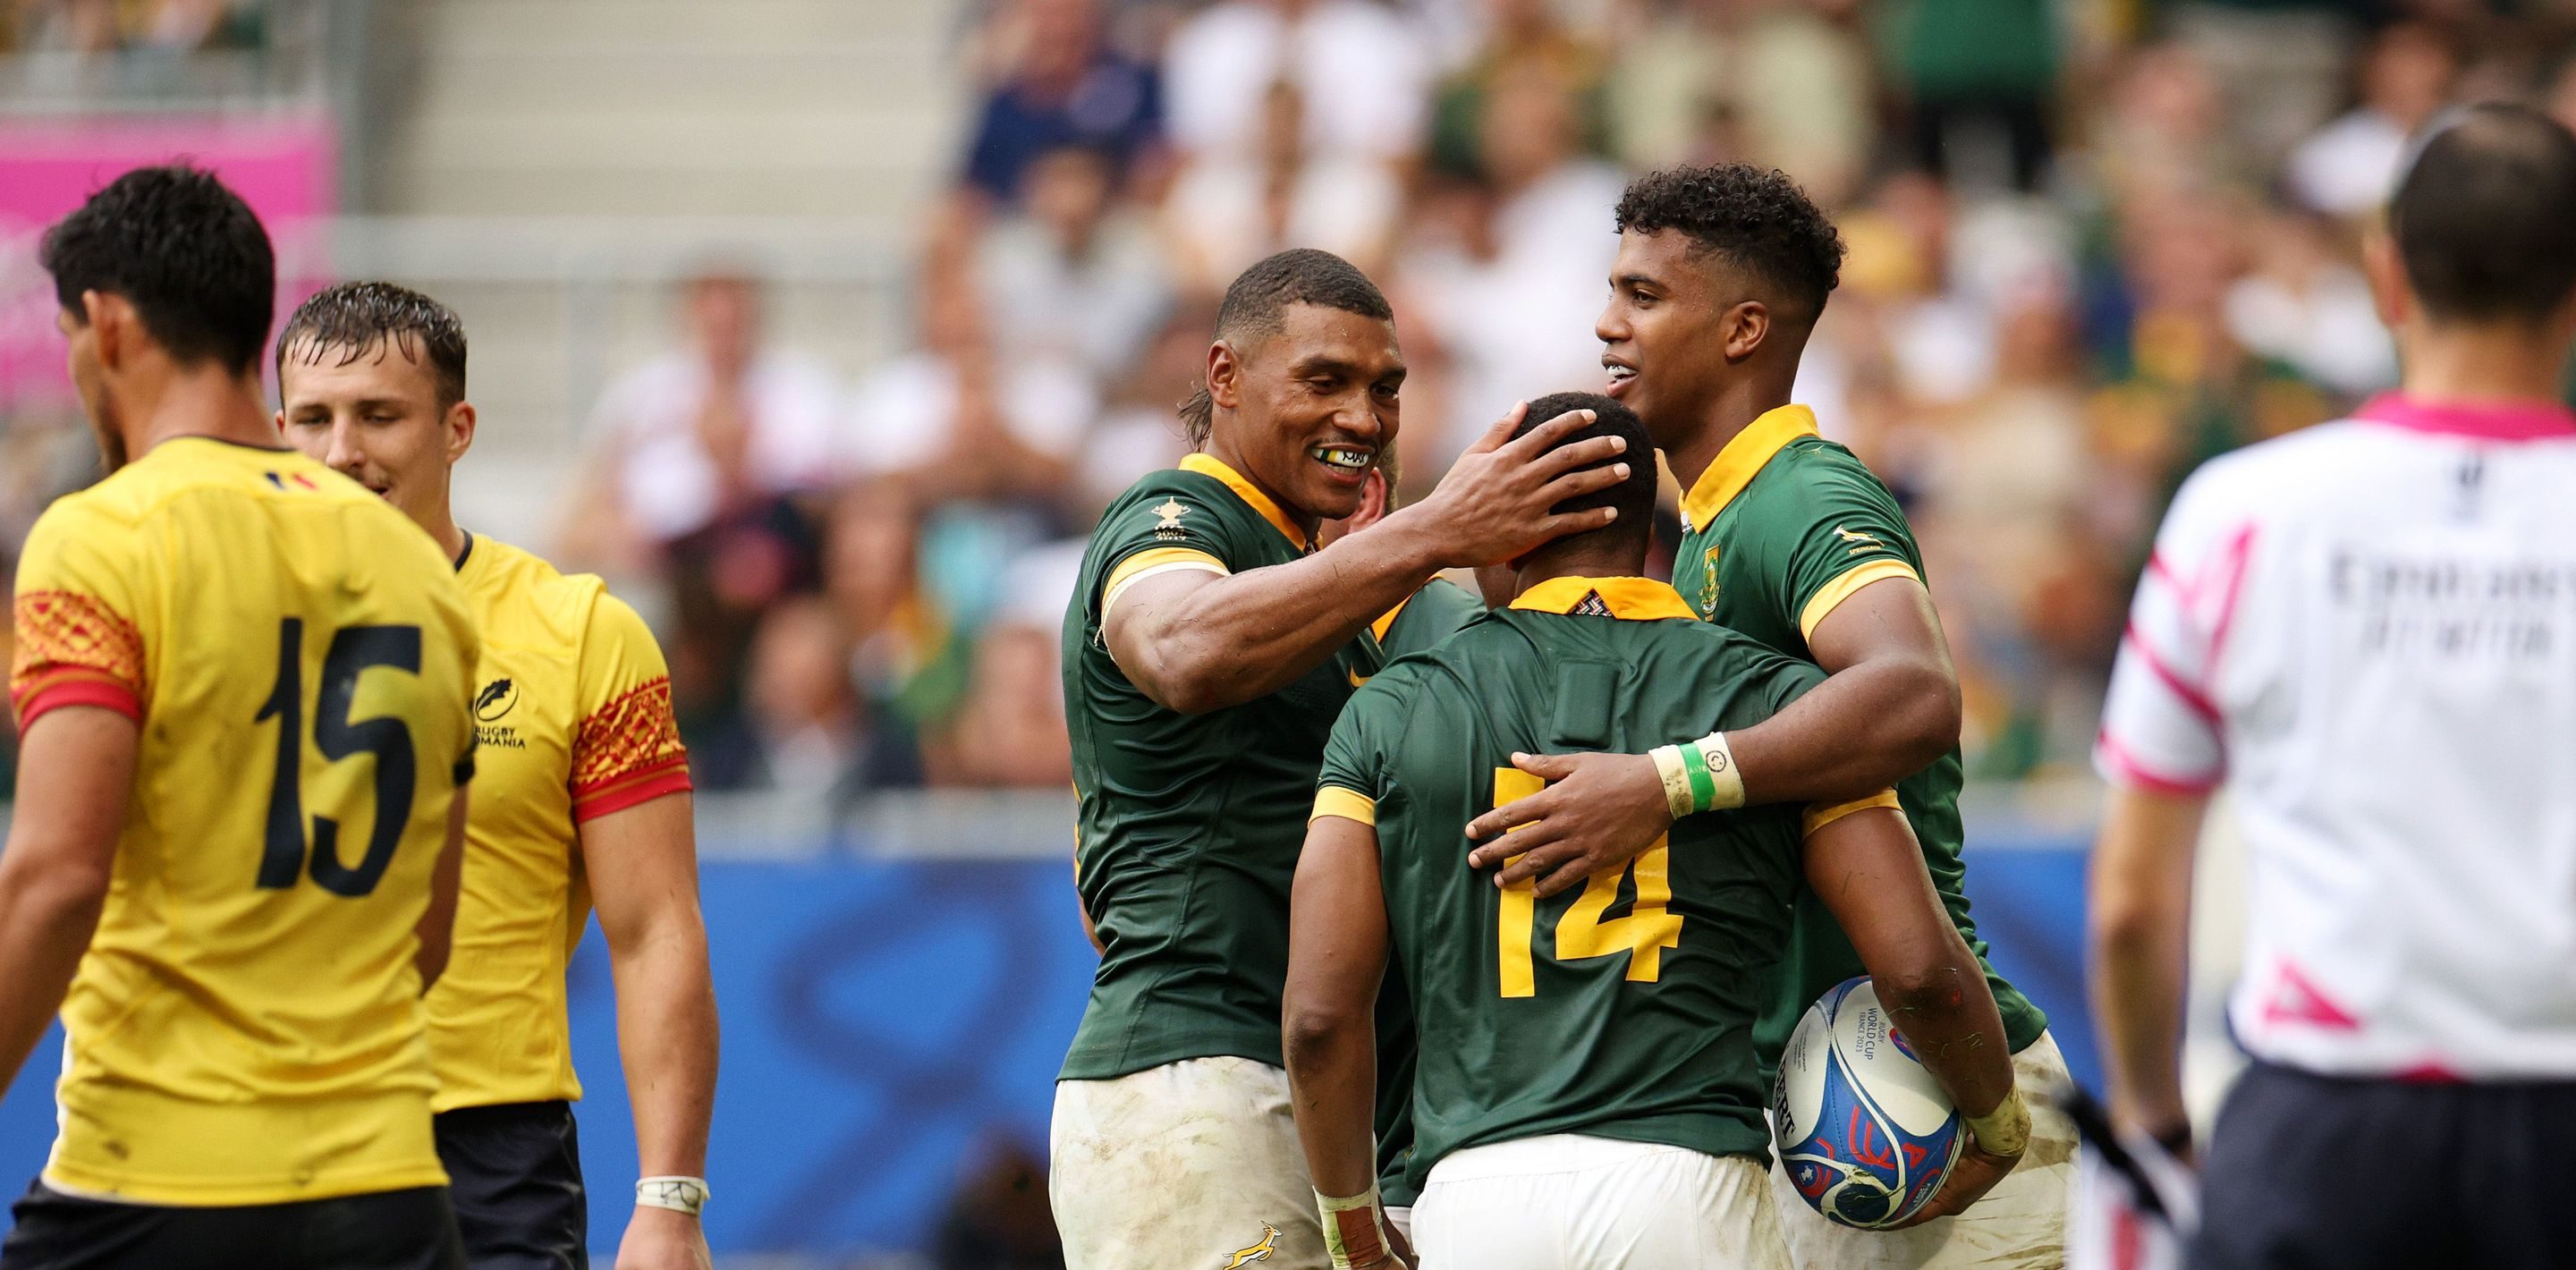 BORDEAUX, FRANCE - SEPTEMBER 17: Grant Williams of South Africa celebrates with Damian Willemse and Canan Moodie of South Africa after scoring his team's seventh try during the Rugby World Cup France 2023 match between South Africa and Romania at Nouveau Stade de Bordeaux on September 17, 2023 in Bordeaux, France. (Photo by Adam Pretty - World Rugby/World Rugby via Getty Images)